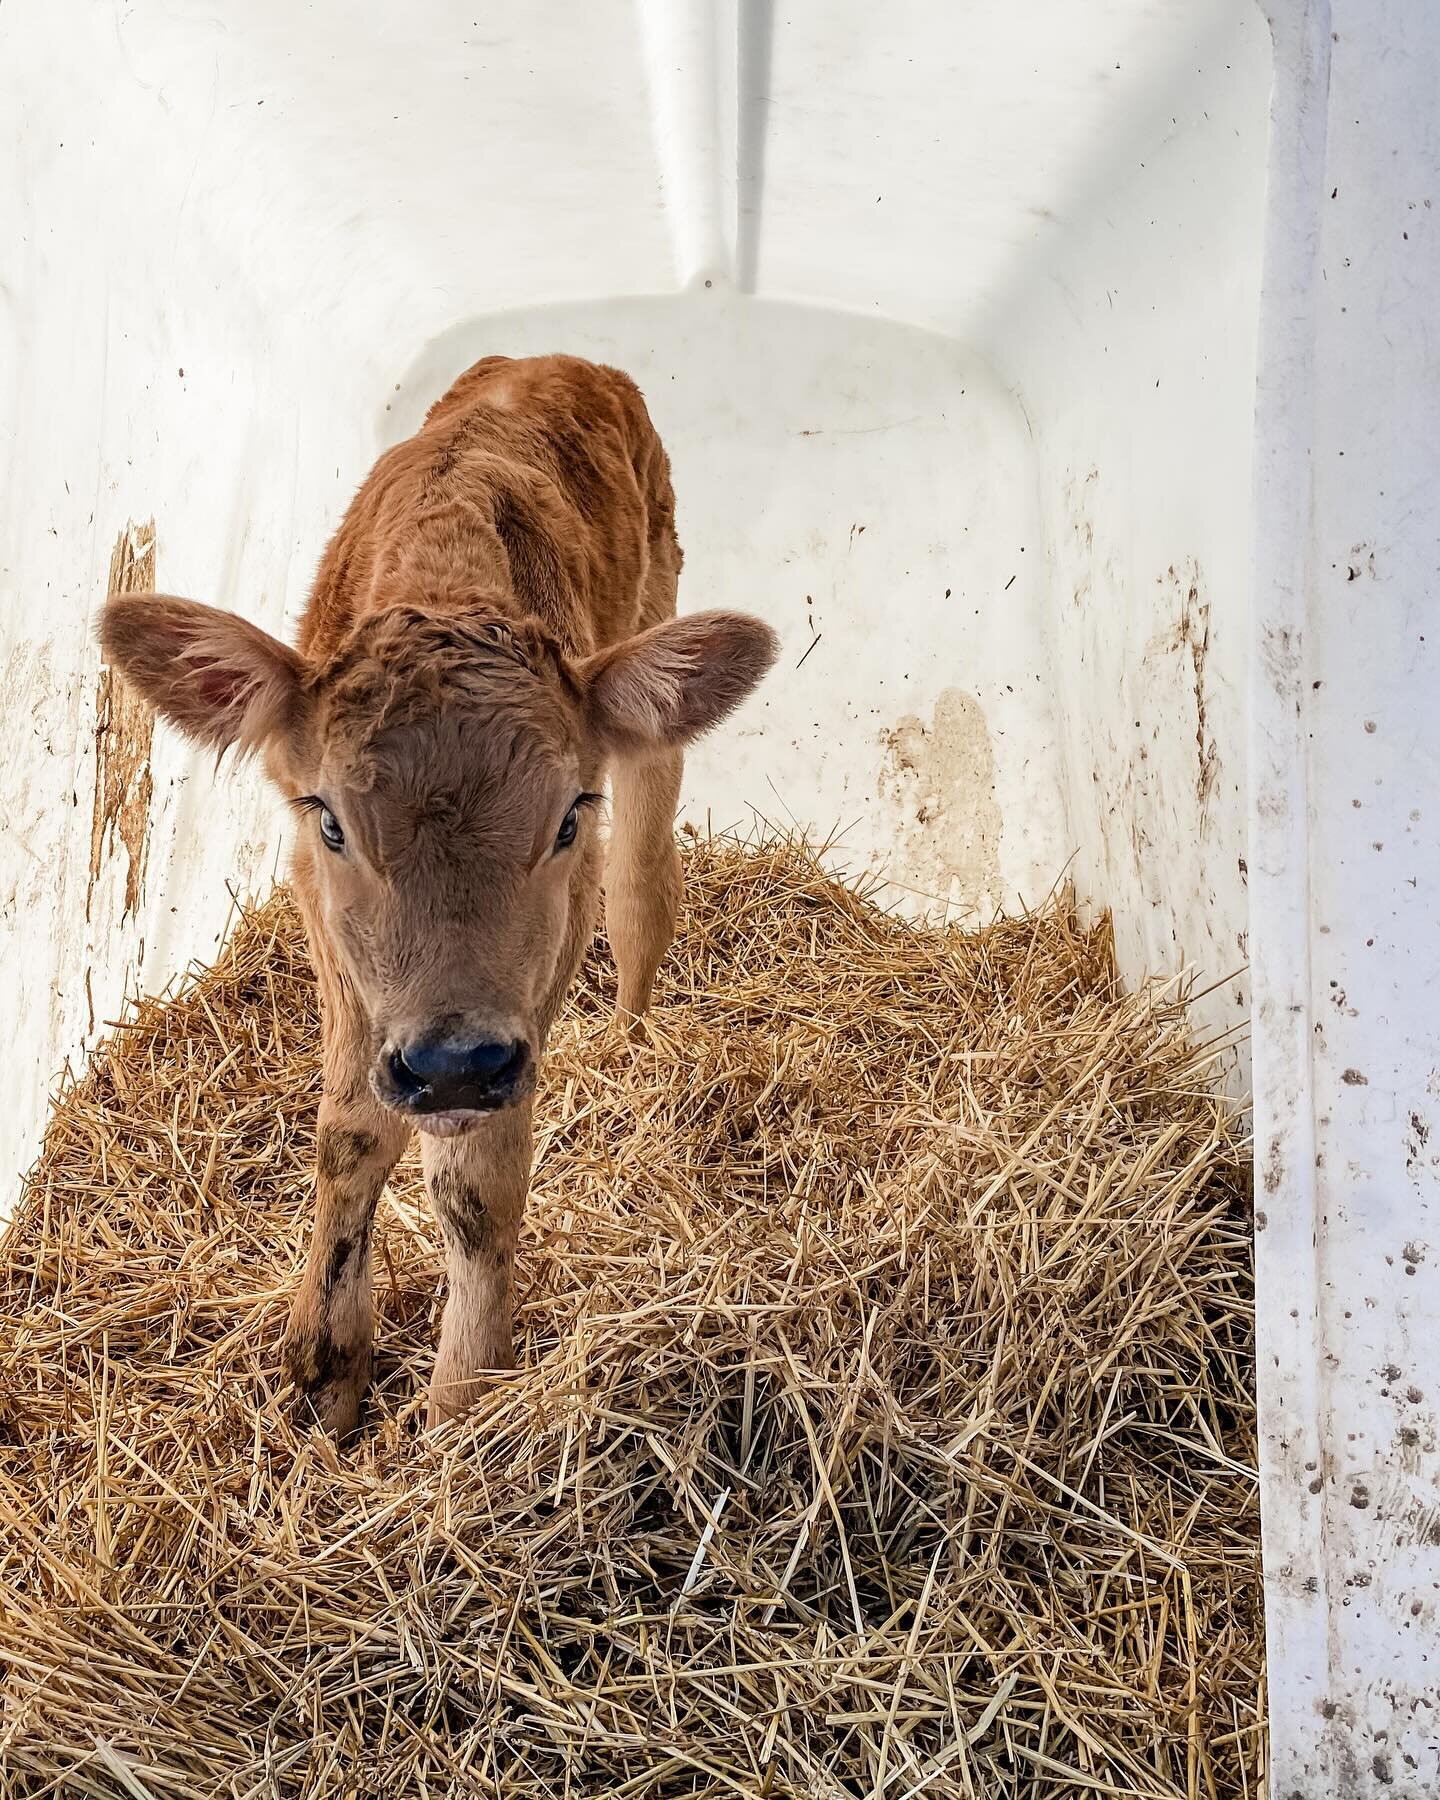 Beautiful &ldquo;winter&rdquo; heifer born this week!! 😍
&hellip;
Normally this is the depths of winter but it feels like this little lady has arrived as a spring babe! ☀️
&hellip;
If you&rsquo;re a weather nerd like us, or a gardener/farmer or want